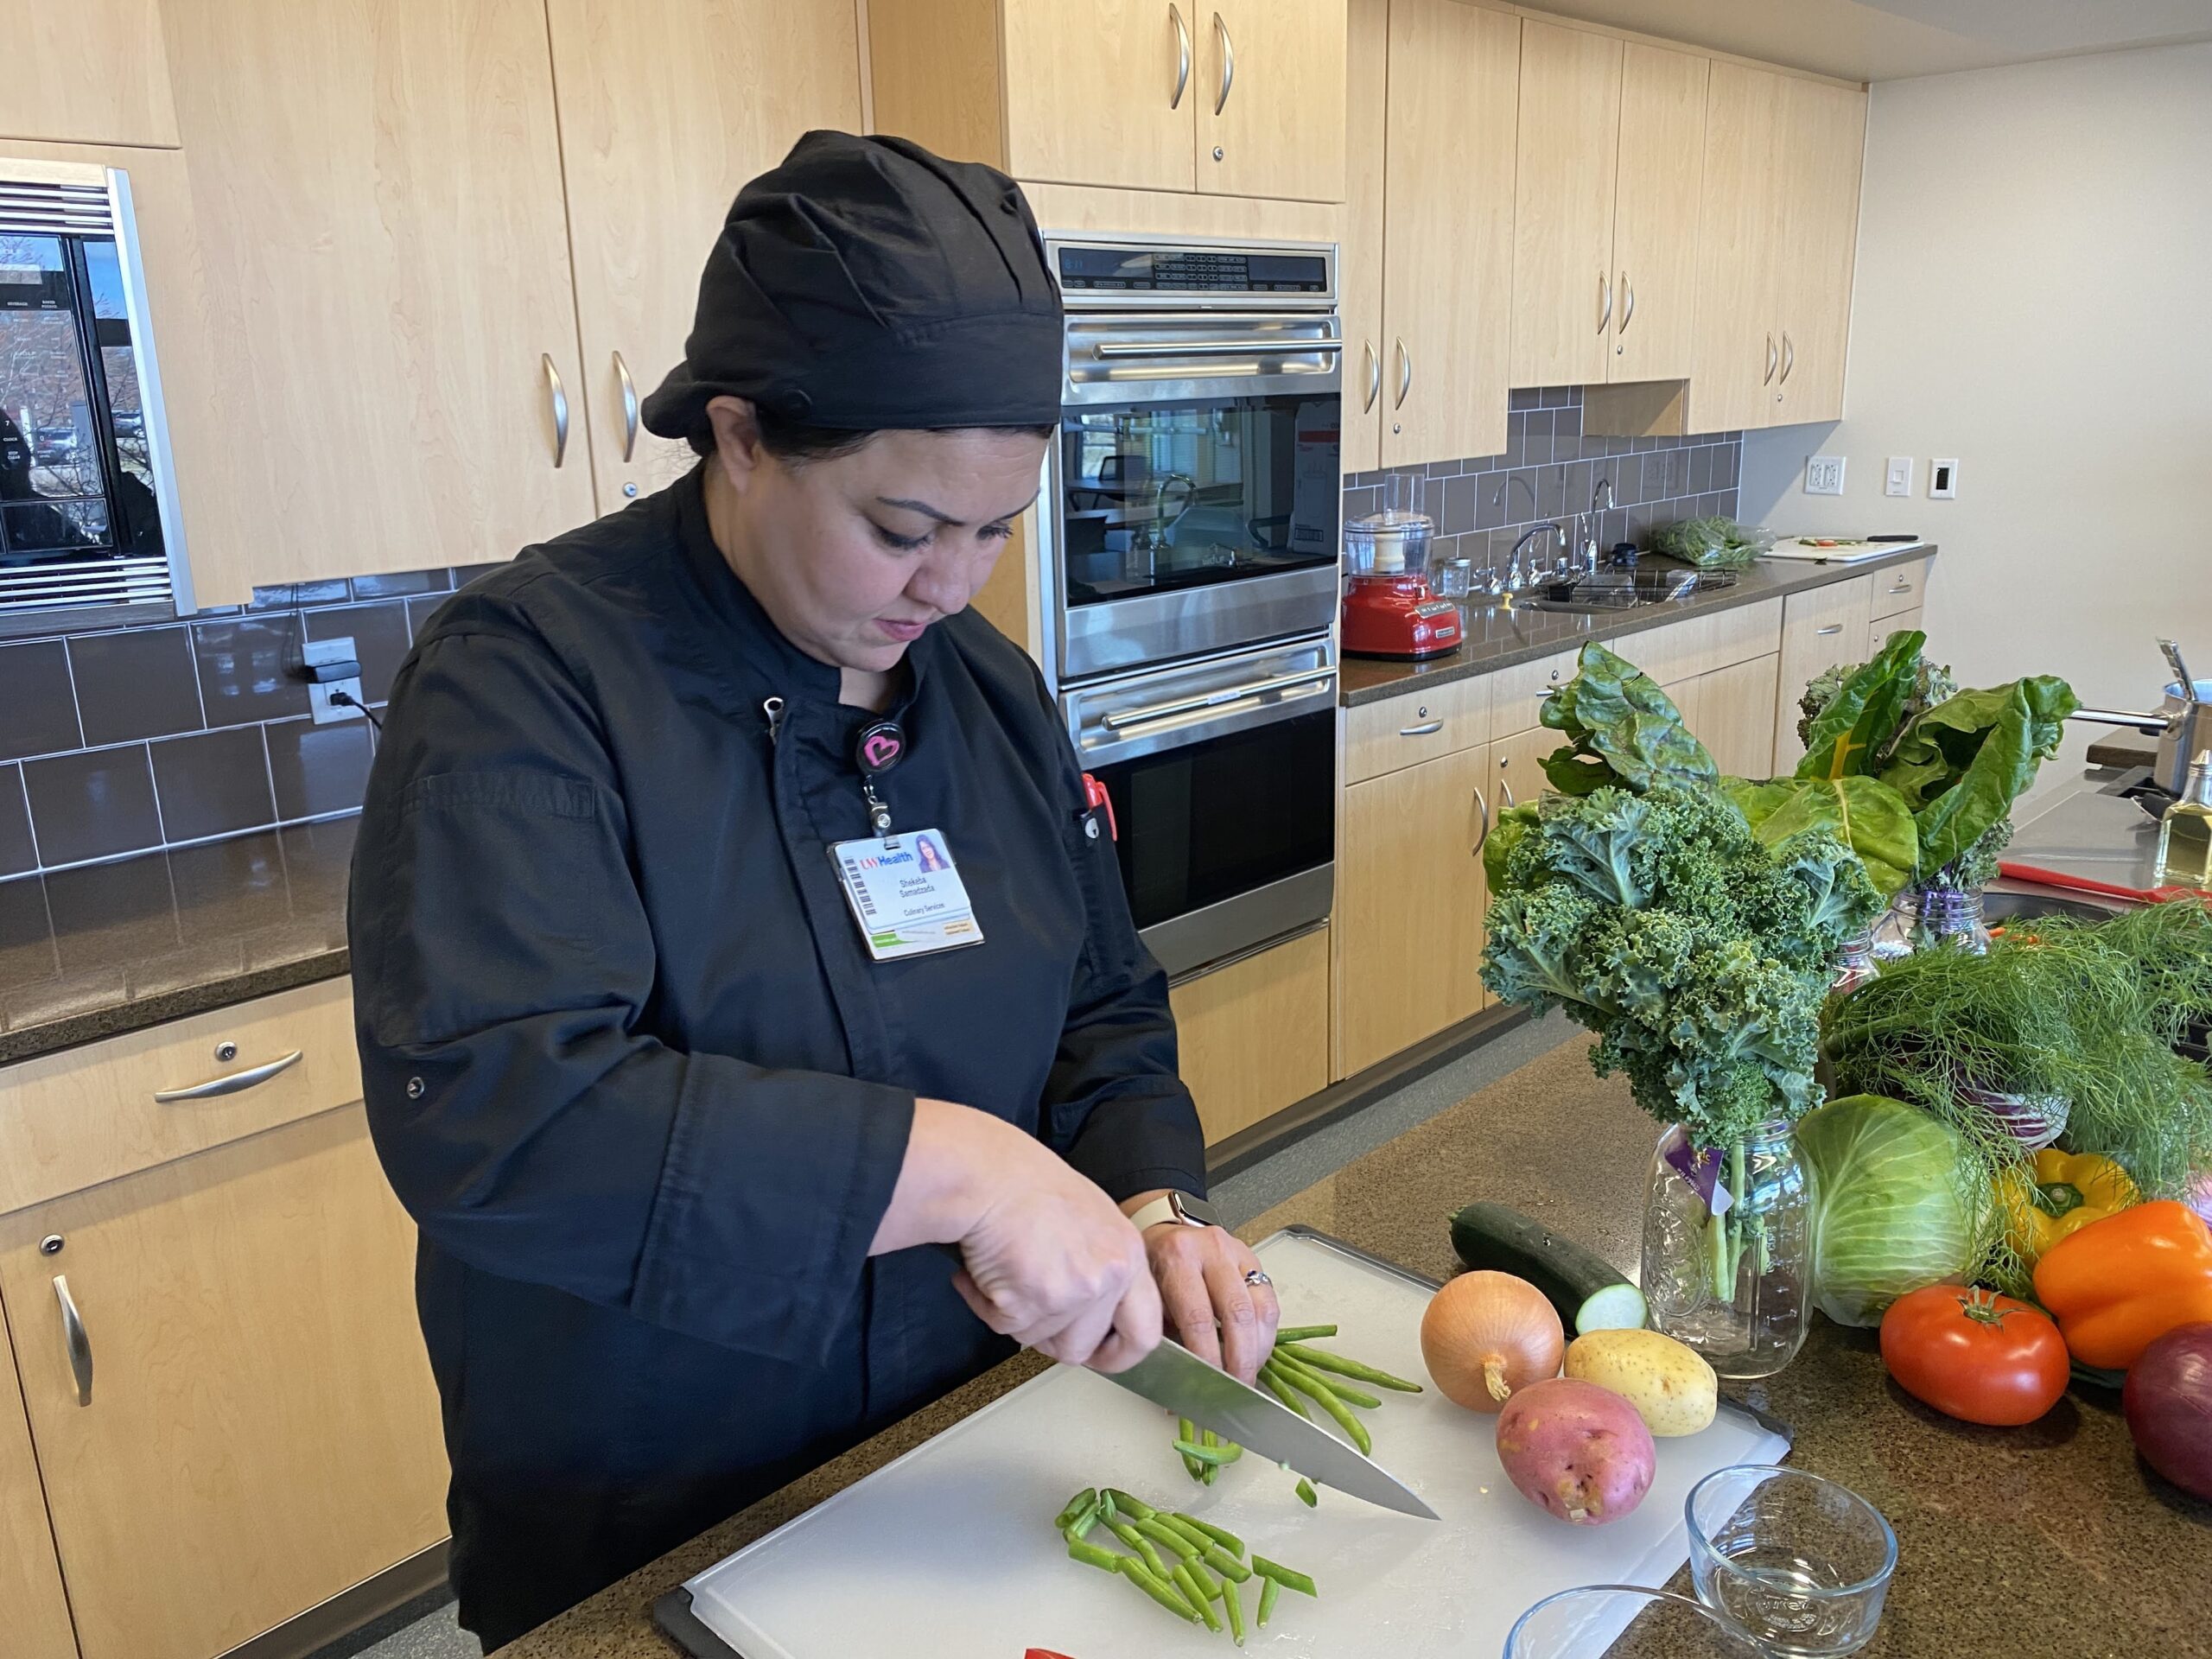 Once a refugee, Afghan chef at UW Hospital makes award-winning dish for patient from Fort McCoy